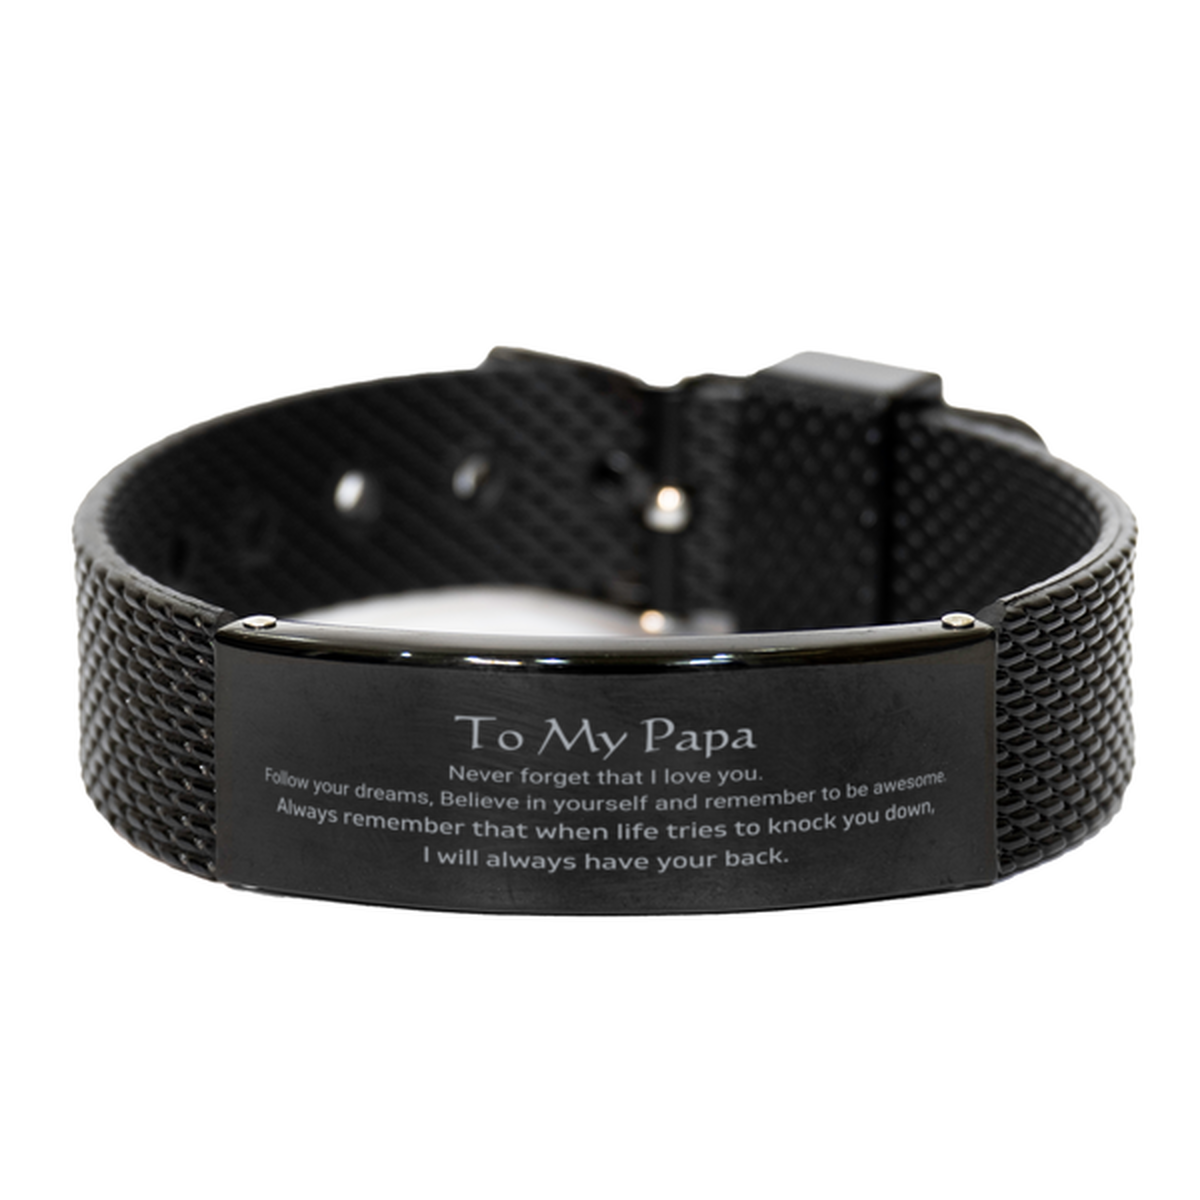 Inspirational Gifts for Papa, Follow your dreams, Believe in yourself, Papa Black Shark Mesh Bracelet, Birthday Christmas Unique Gifts For Papa